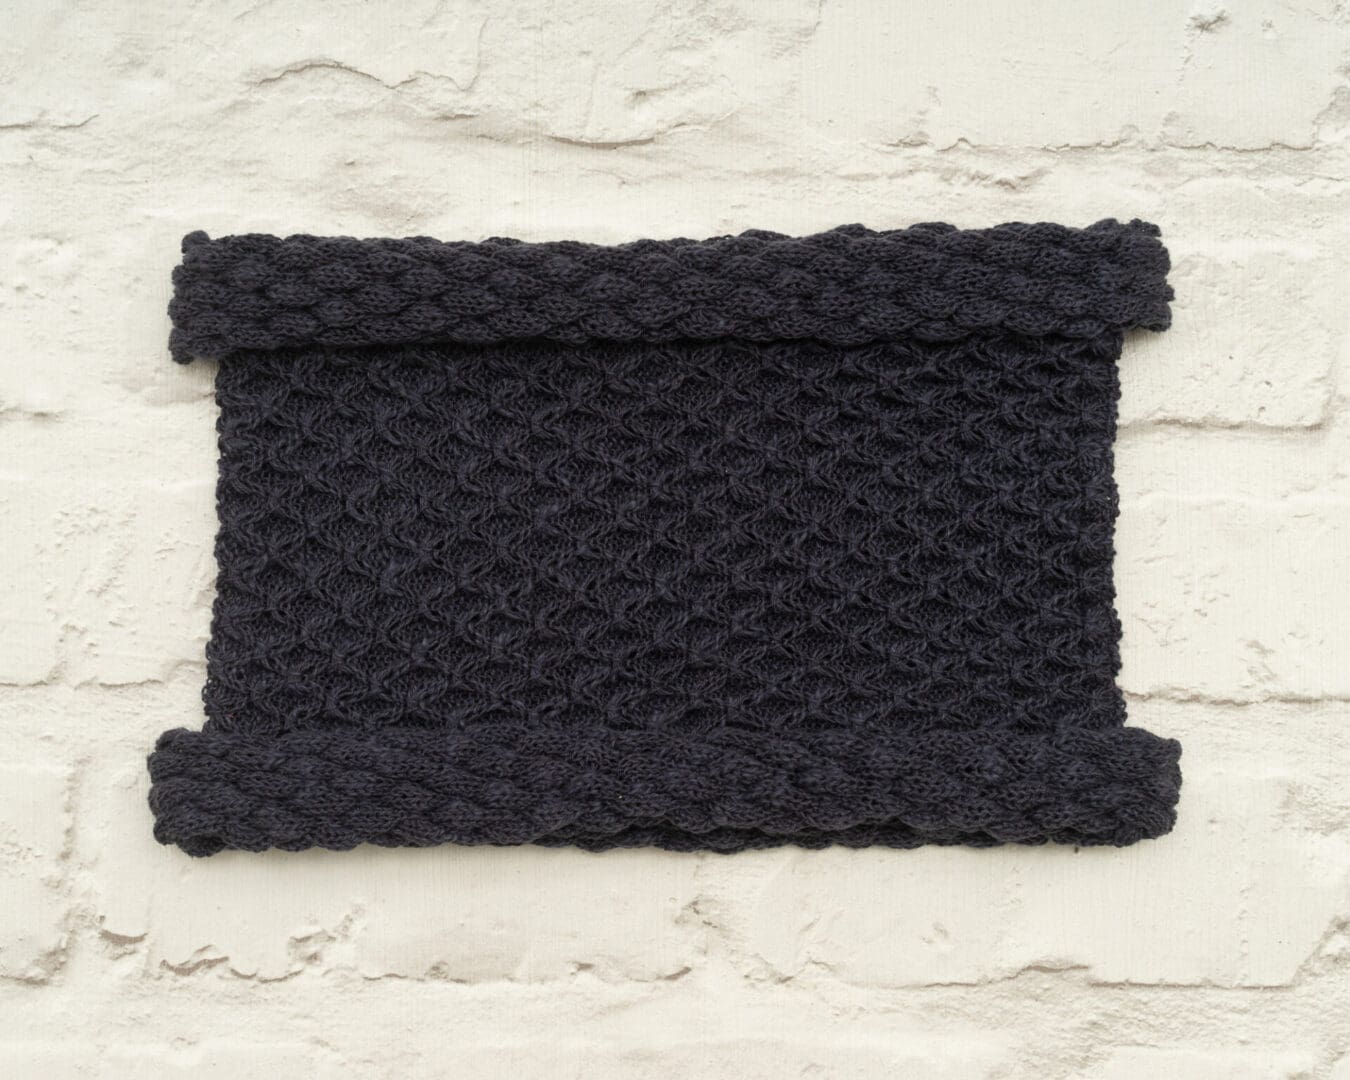 handmade knitted charcoal grey patterned cowl